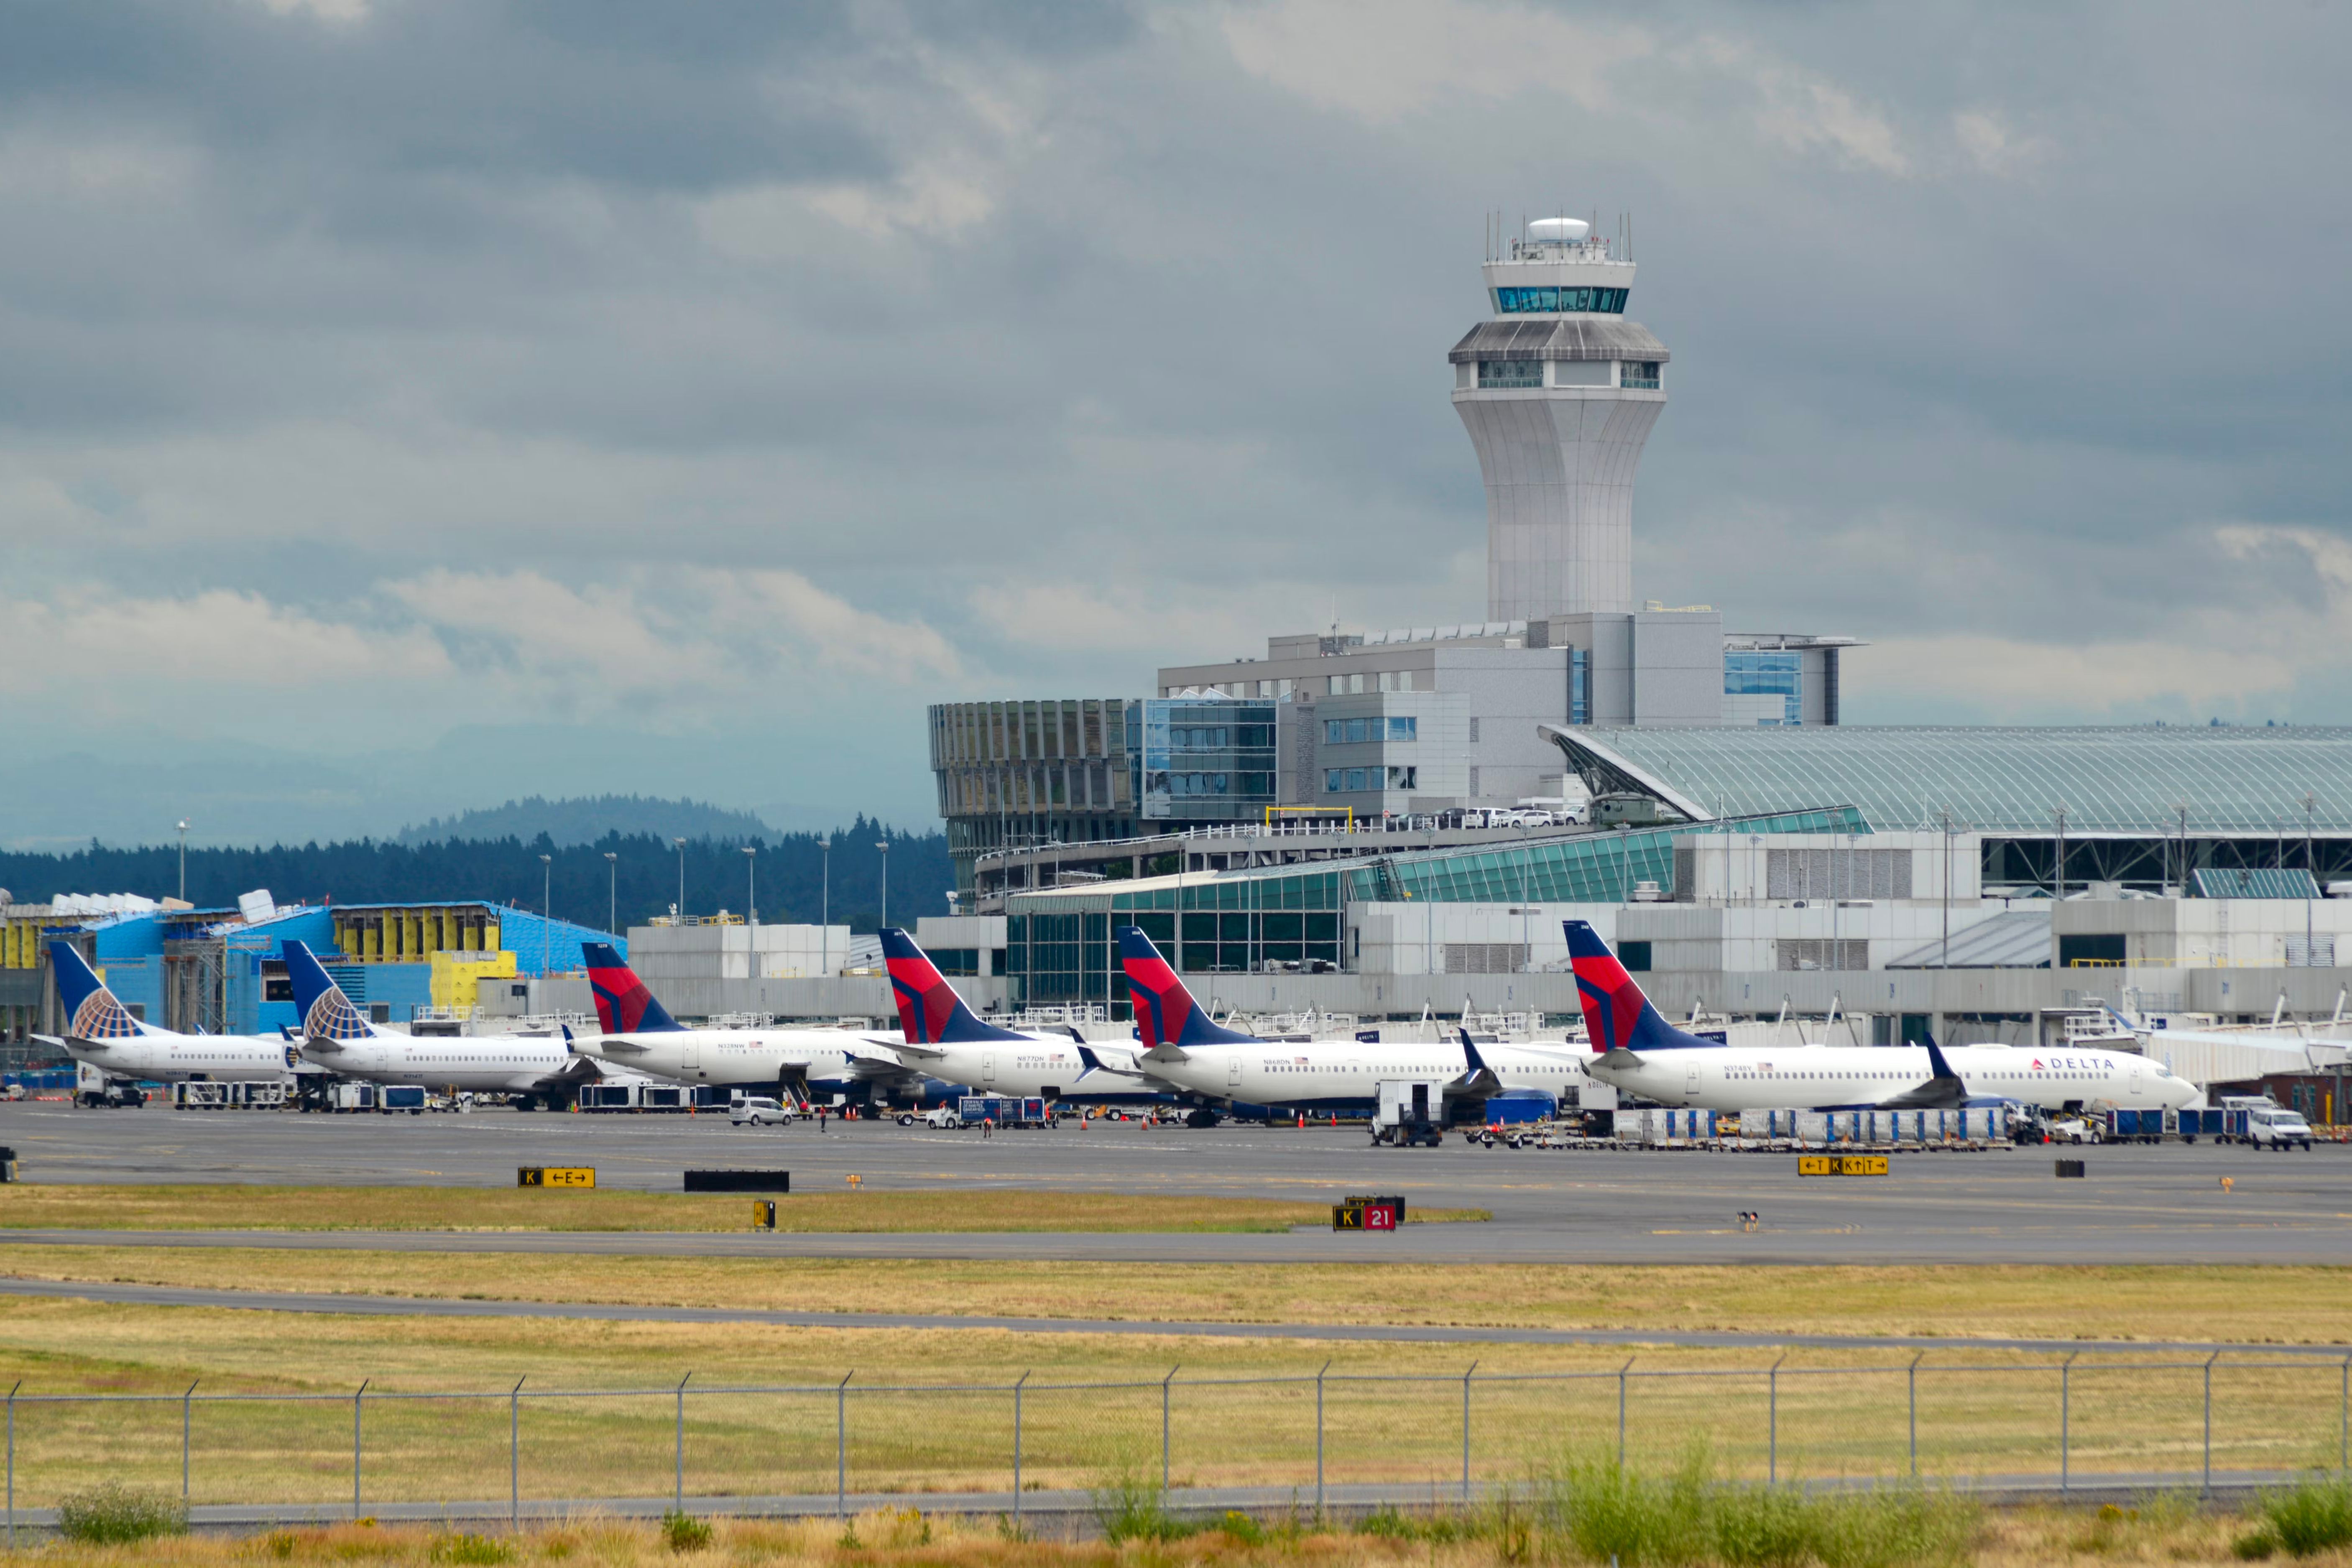 United Airlines and Delta Airlines aircraft at Portland International Airport.